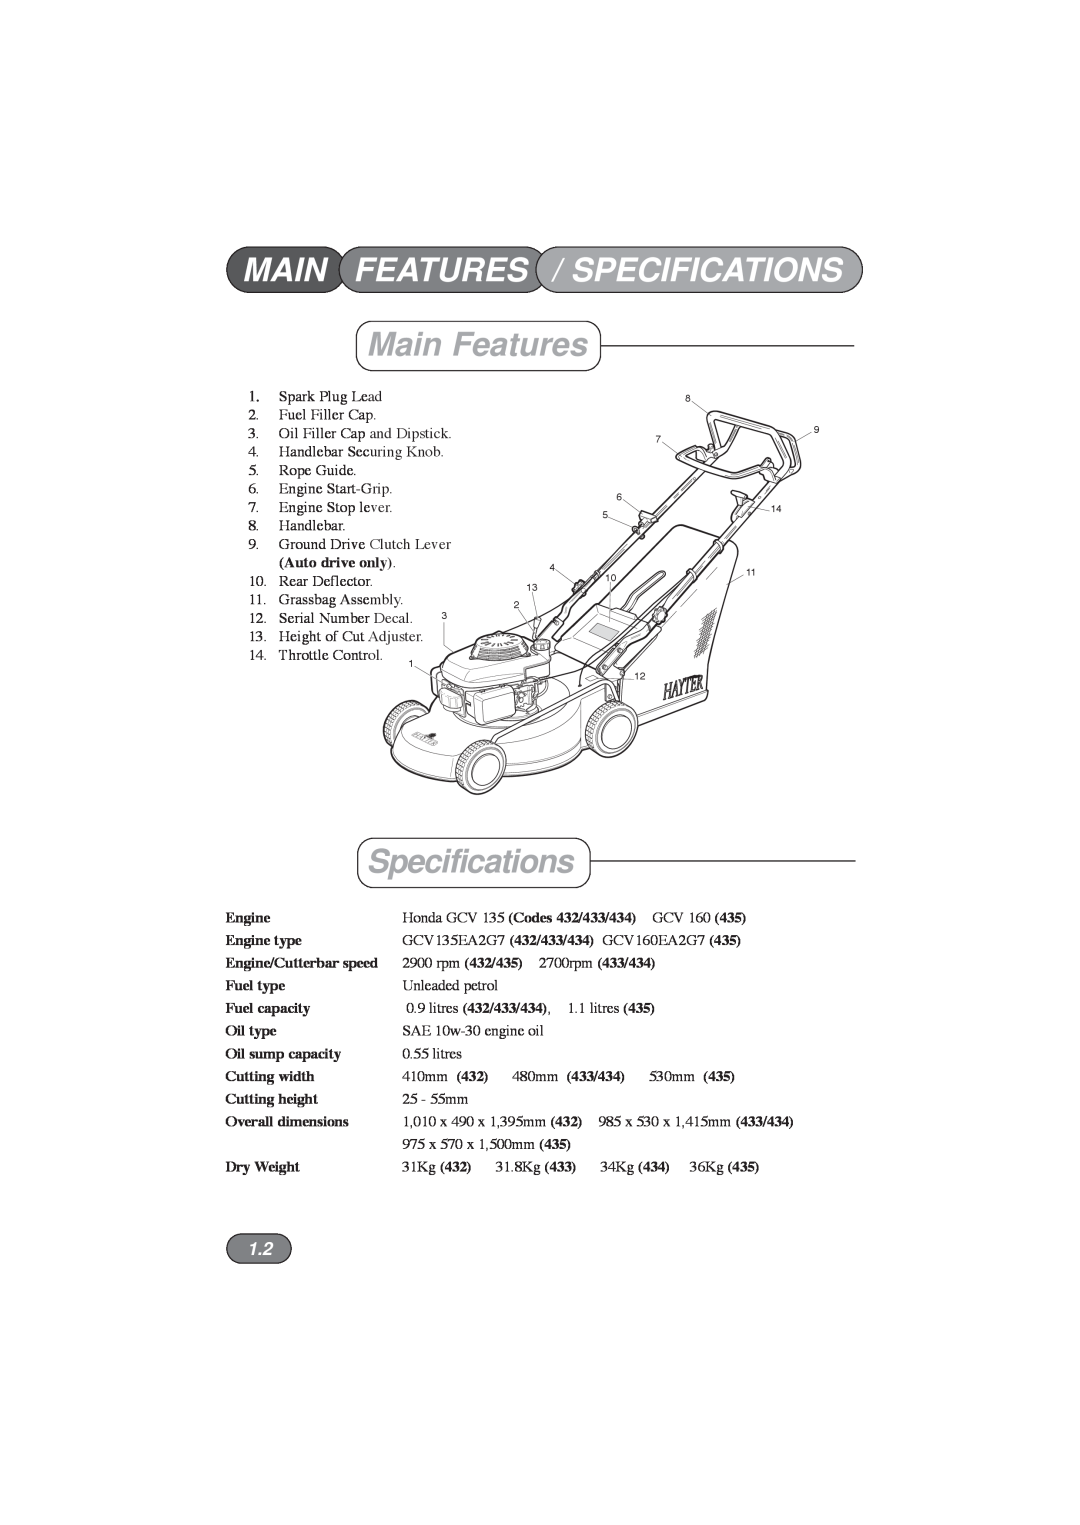 Hayter Mowers 433D, 435D, 434D, 432D manual Main Features / Specifications 